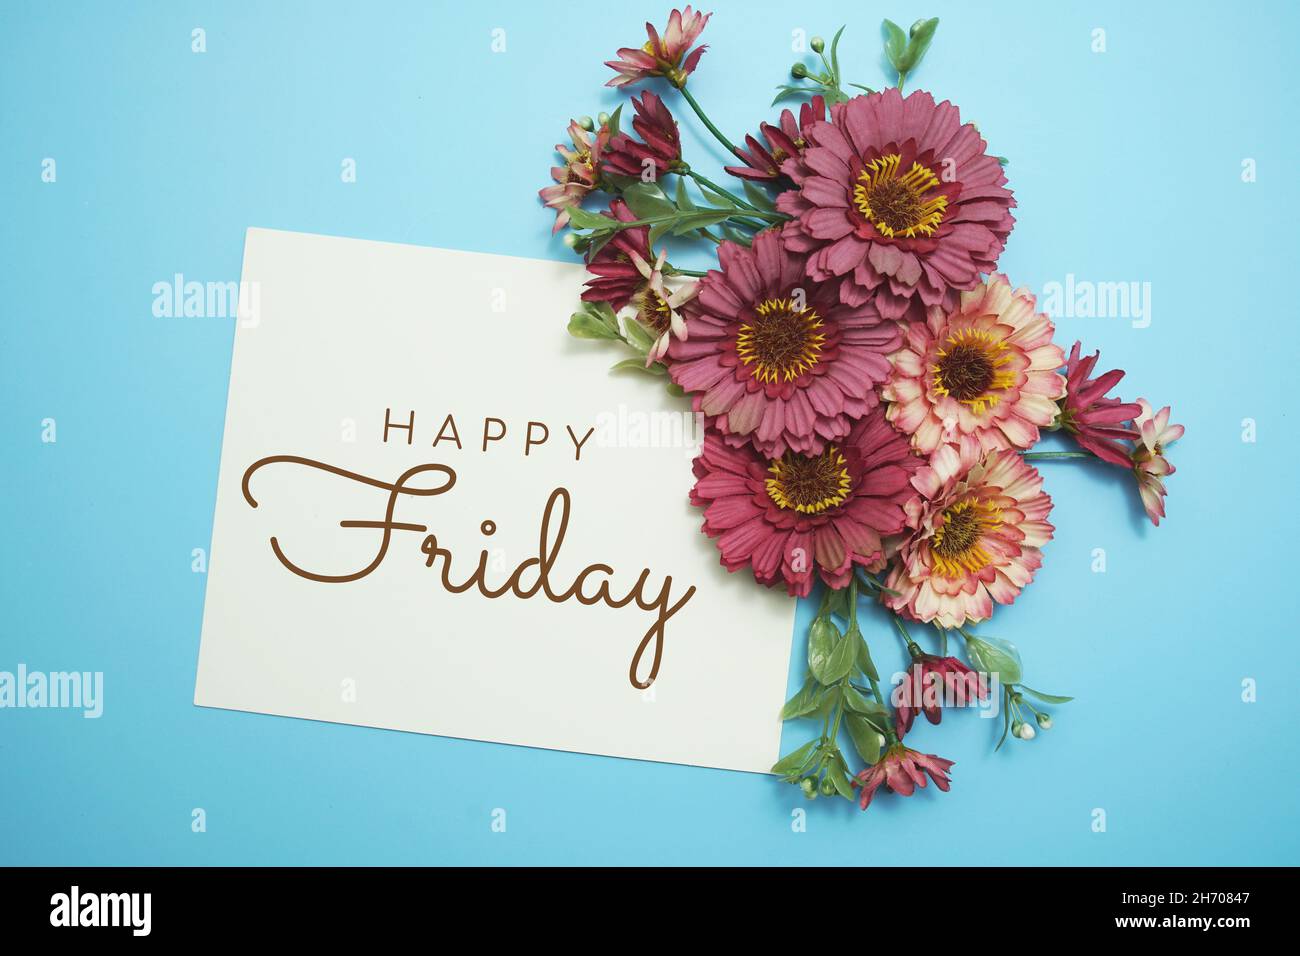 Happy Friday card typography text with flower bouquet on blue background Stock Photo